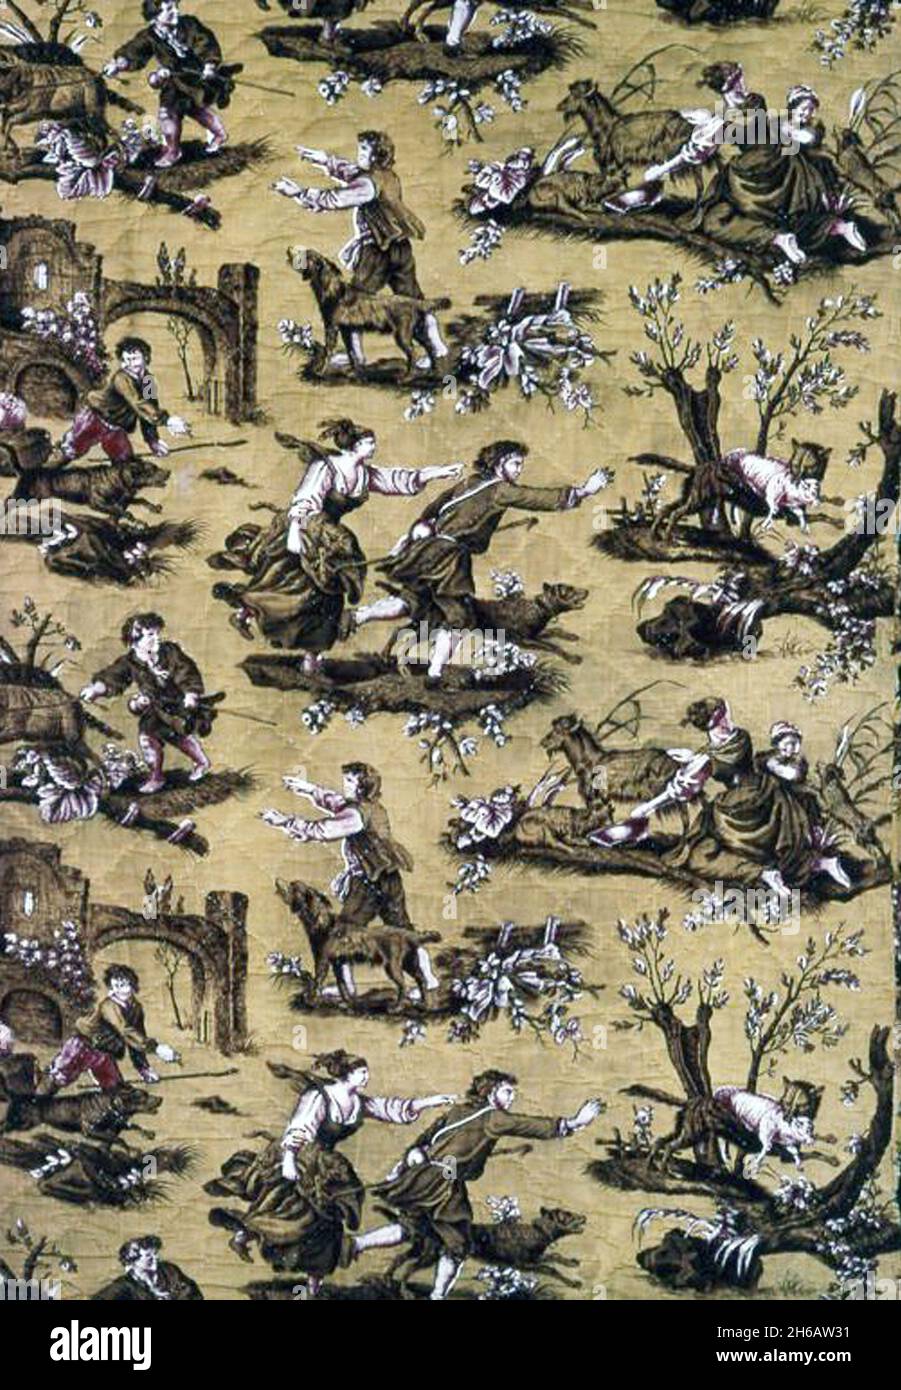 Au Loup! (Furnishing Fabric), France, 1783/89. Wolf! designed by Jean Baptiste Huet after Jacques Stella, manufactured by Christophe Phillipe Oberkampf. Stock Photo